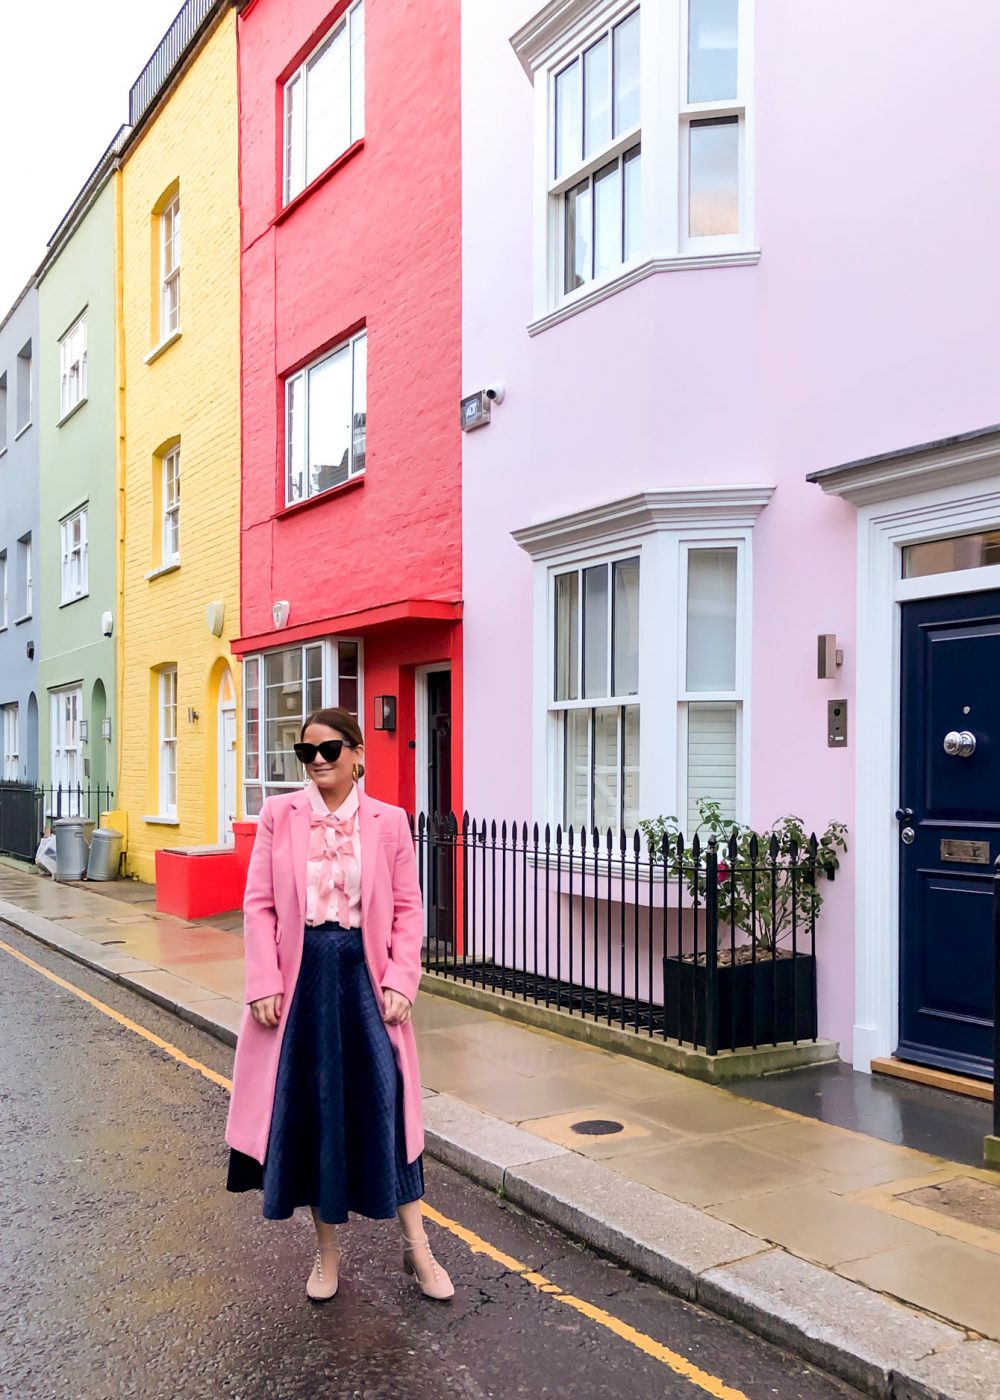 Colorful Homes London